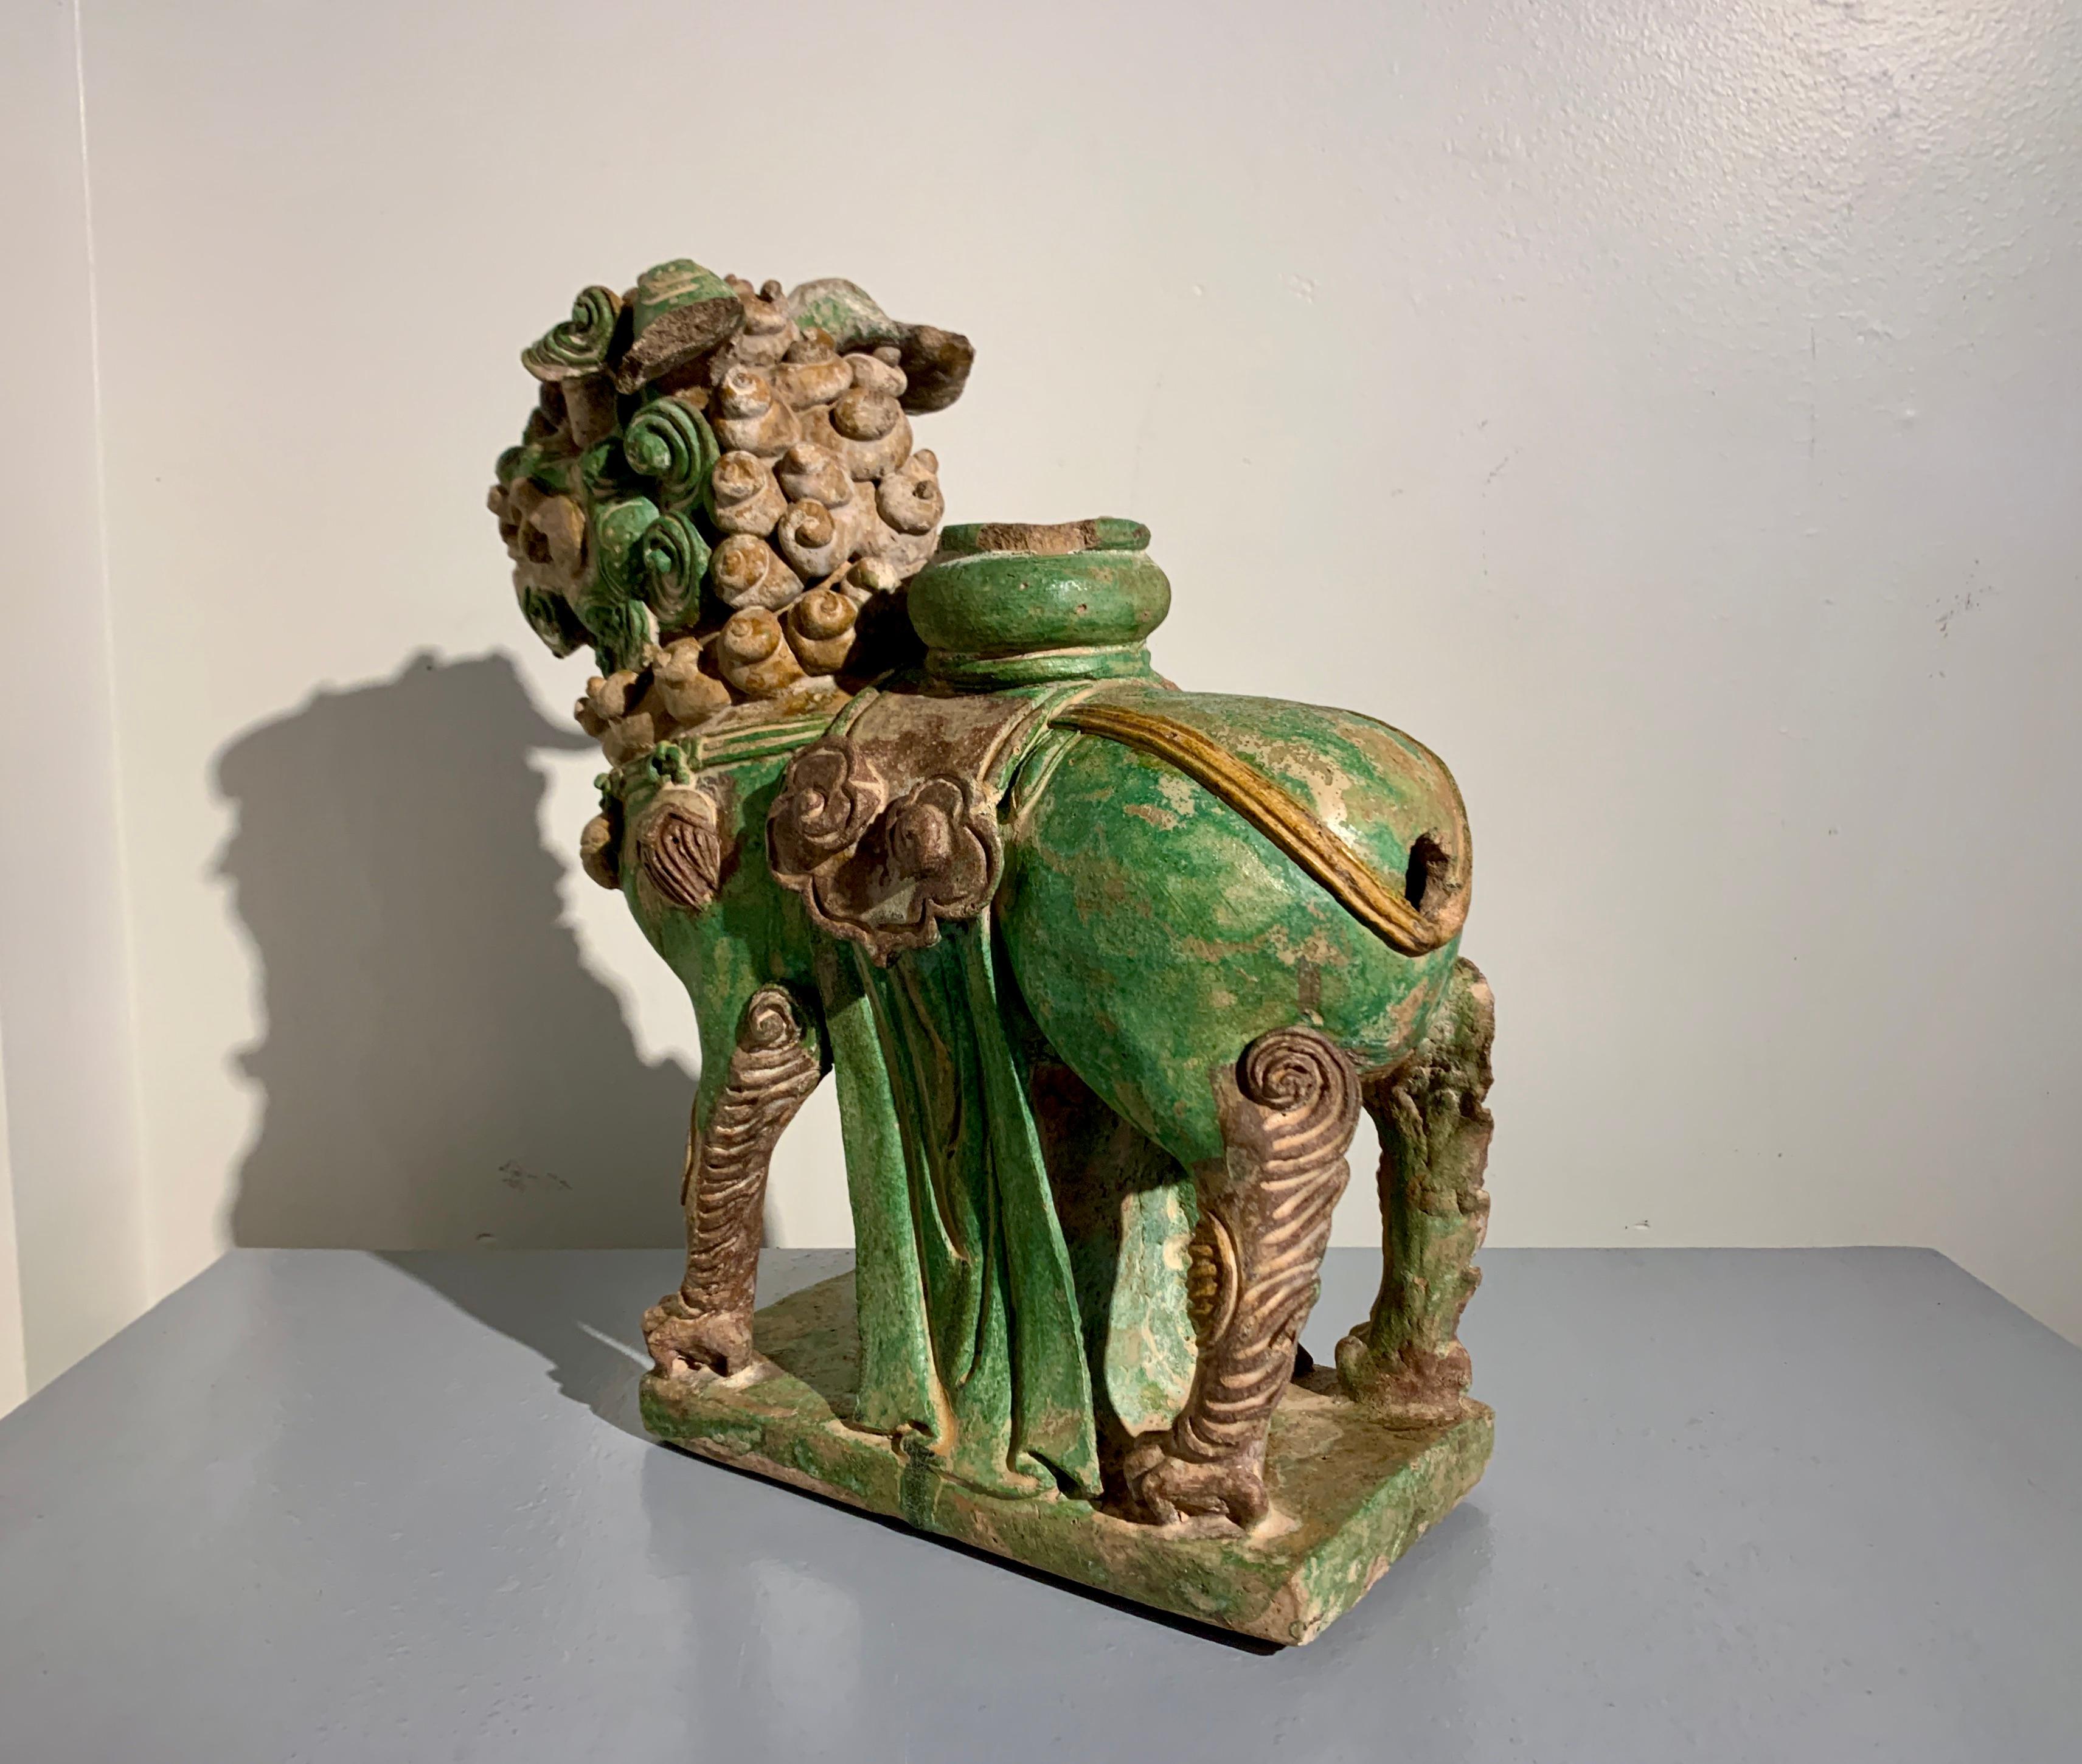 Chinese Ming Dynasty Sancai Glazed Pottery Guardian Lion, late 16th Century For Sale 2